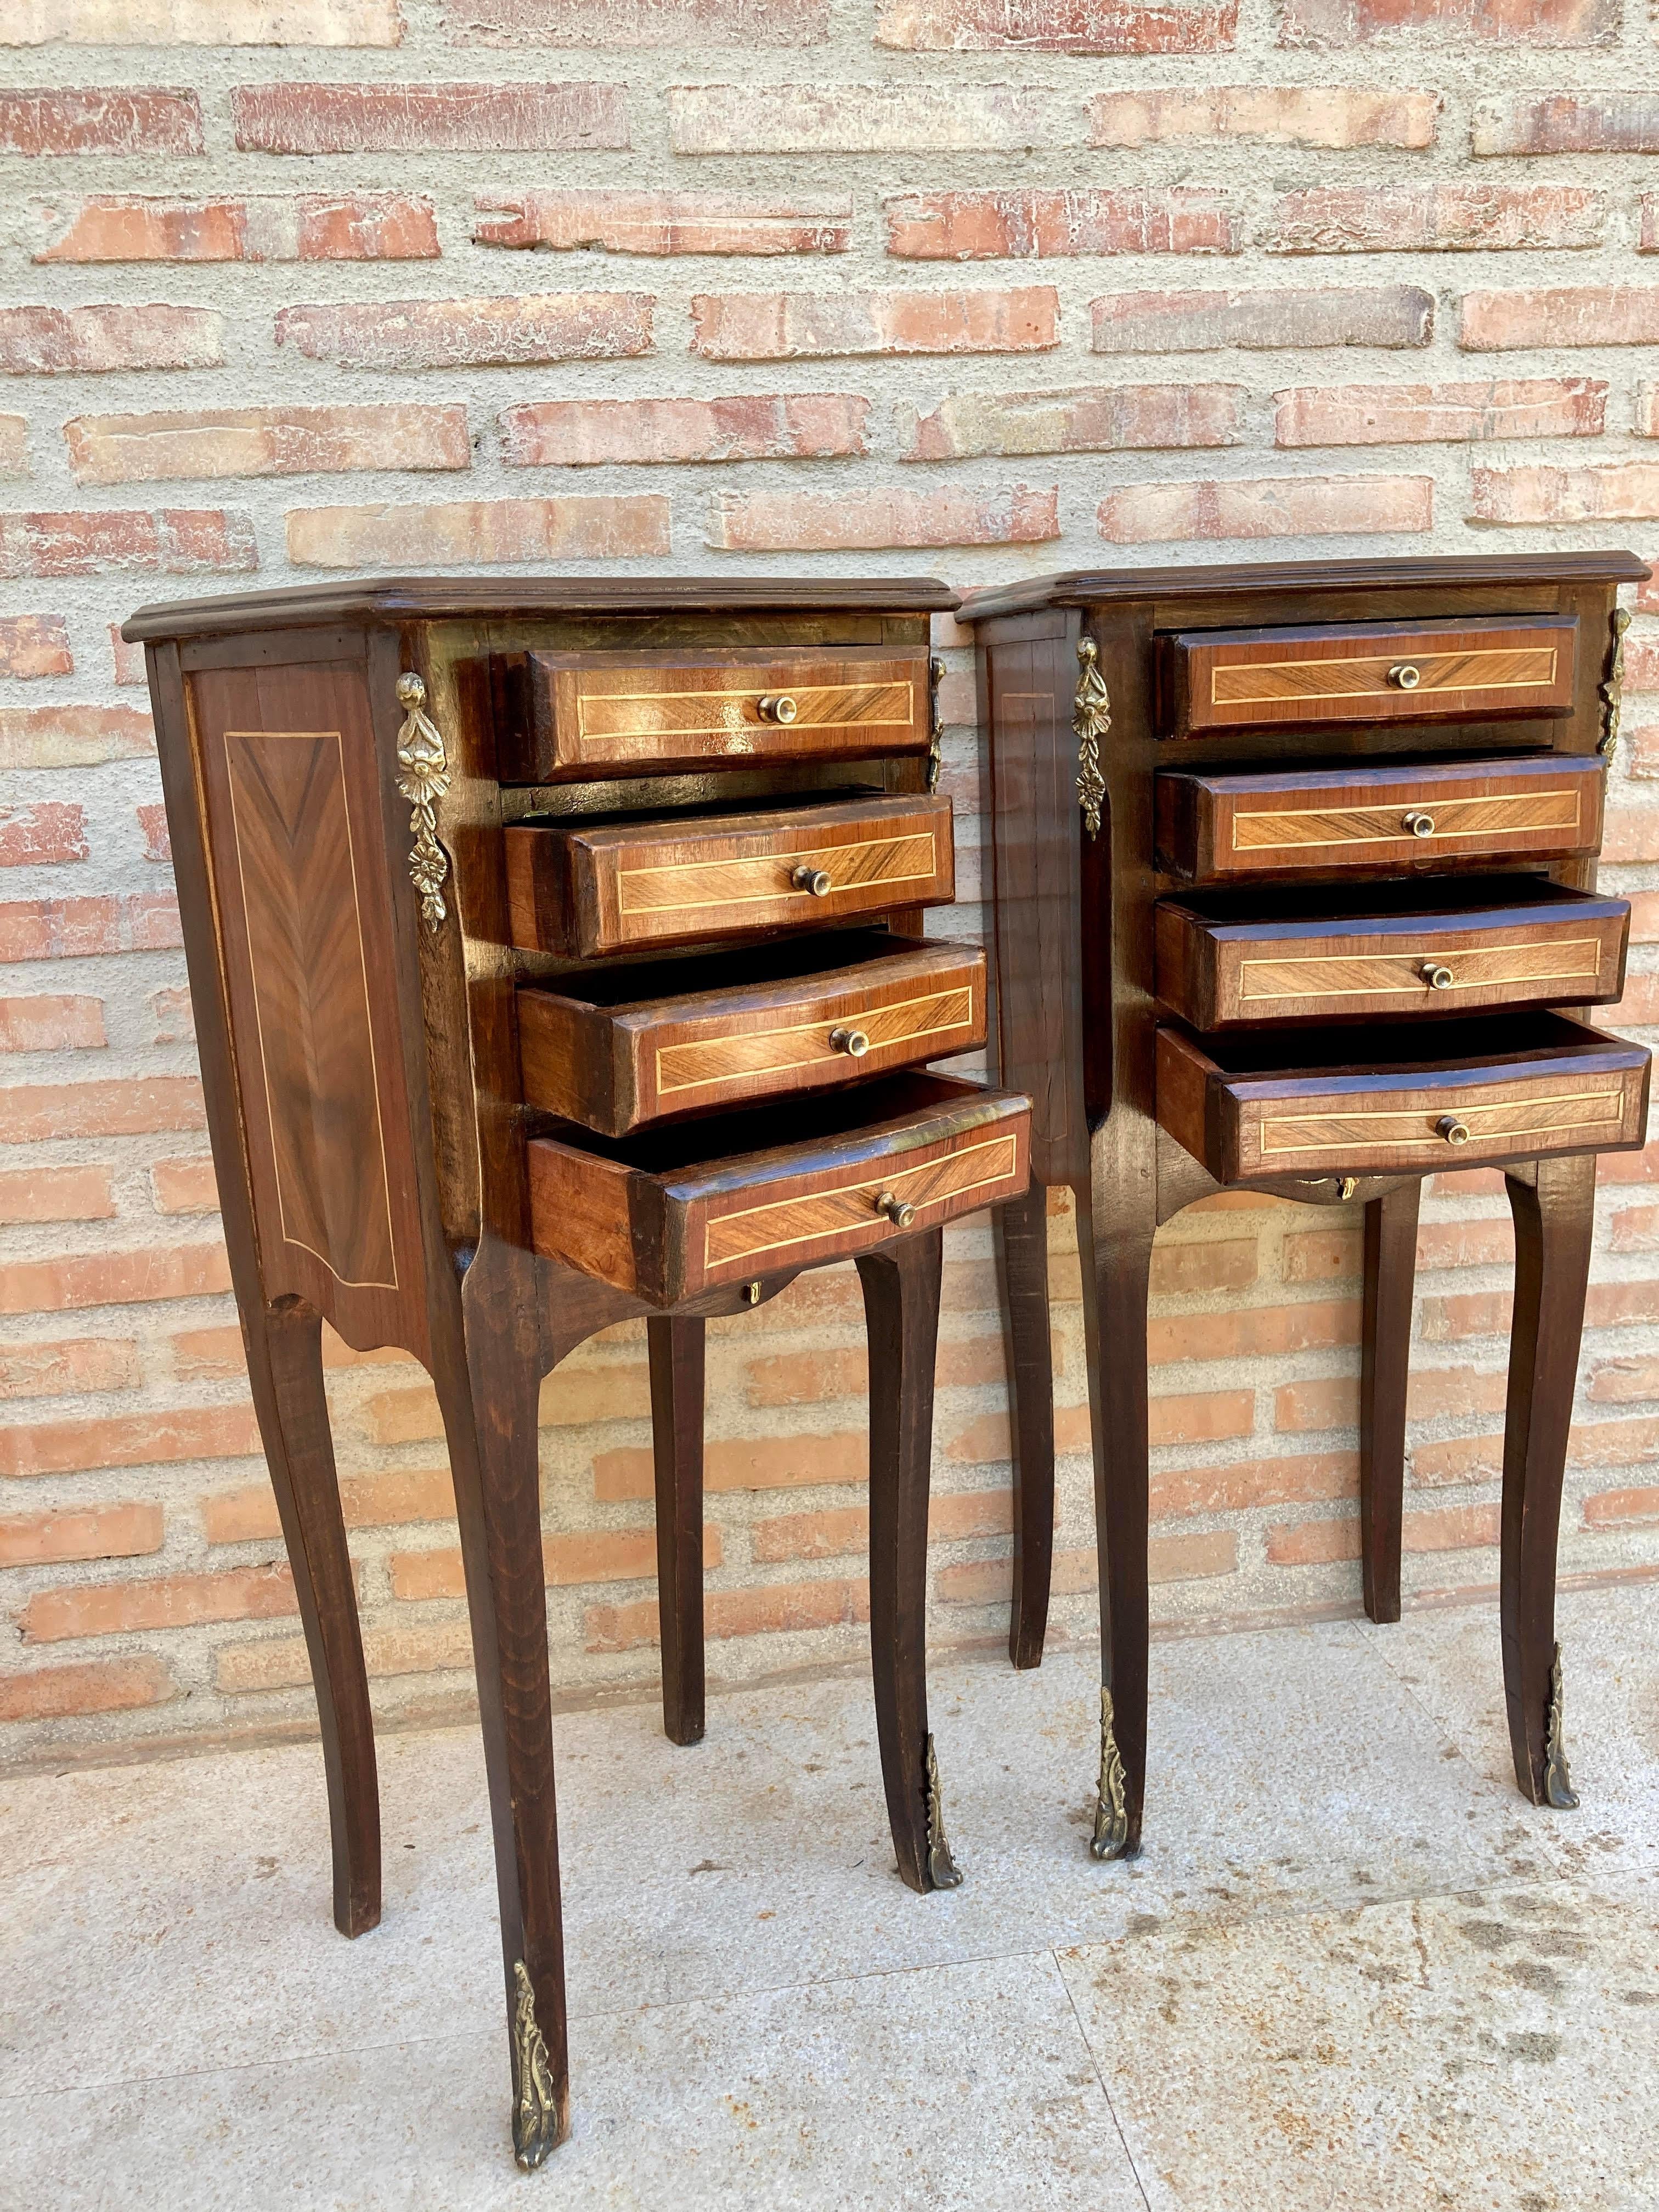 20th Century Pair of French Louis XV Style Tulipwood Veneer Bedside Tables or Nightstands For Sale